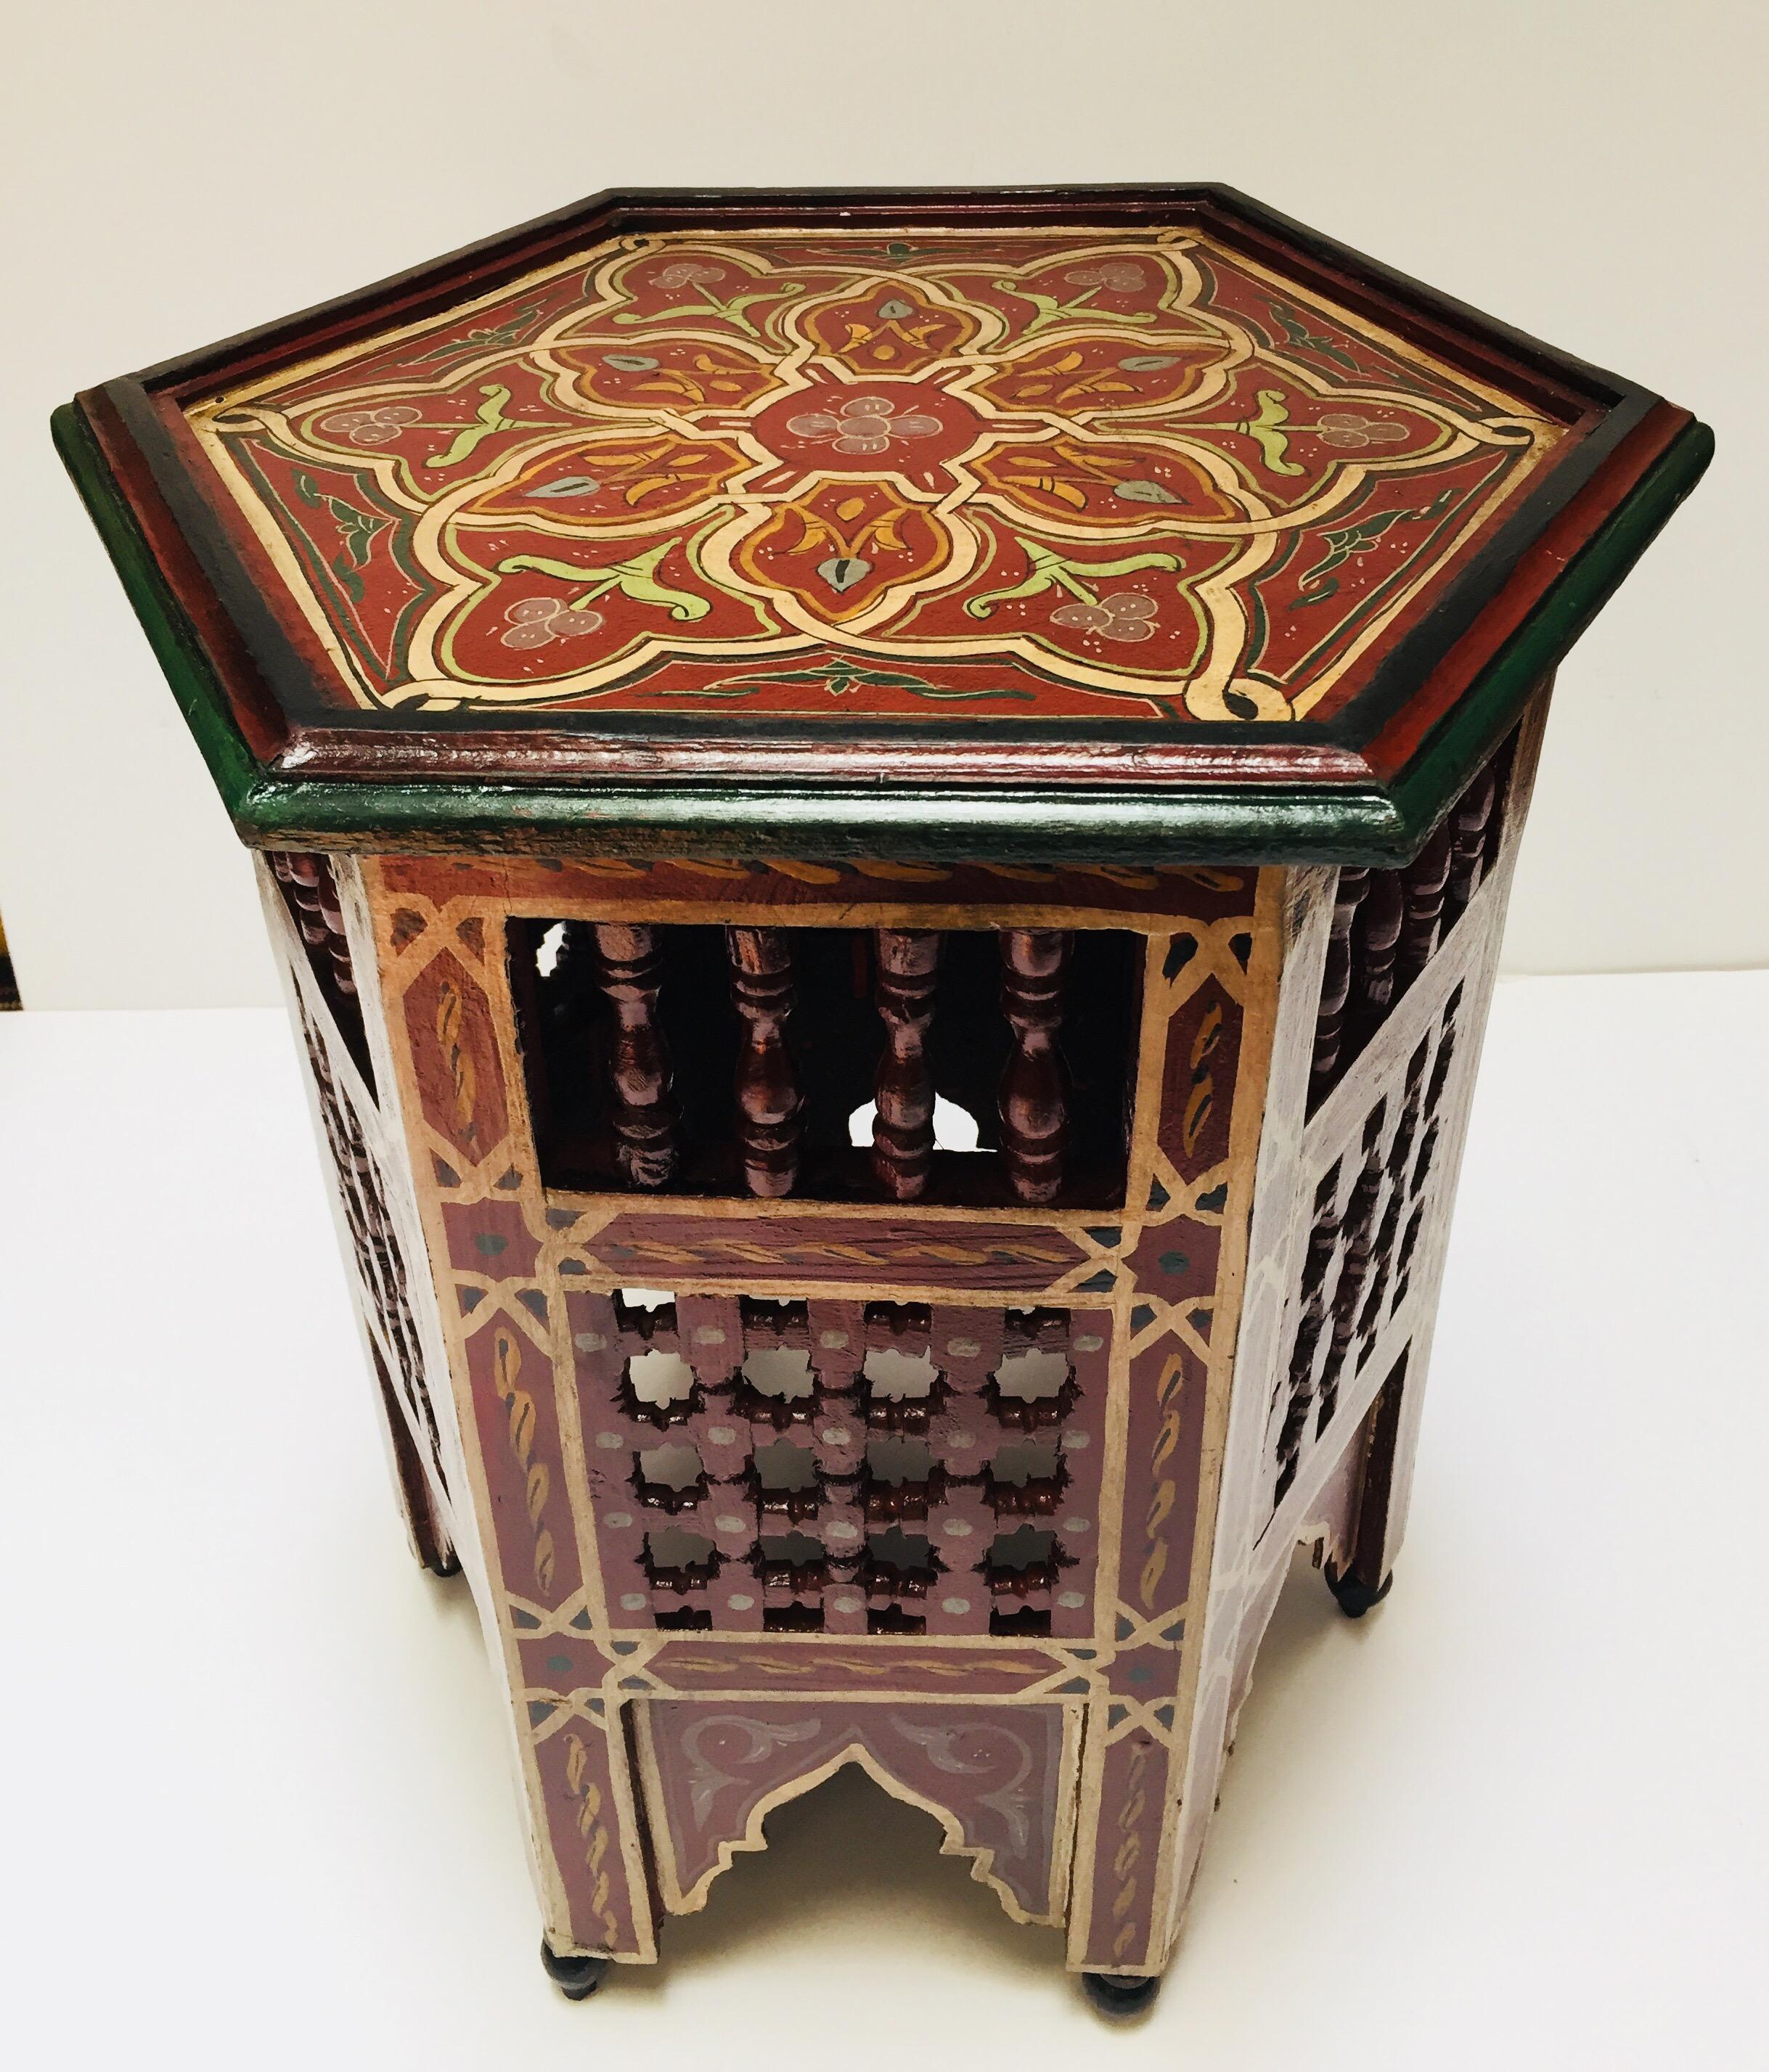 Moroccan hand-painted side table with Moorish designs.
Hexagonal shape, Moroccan vintage side table hand-painted on dark burgundy background, floral and geometric designs and moucharabieh fretwork cutout on the sides with Moorish arches.